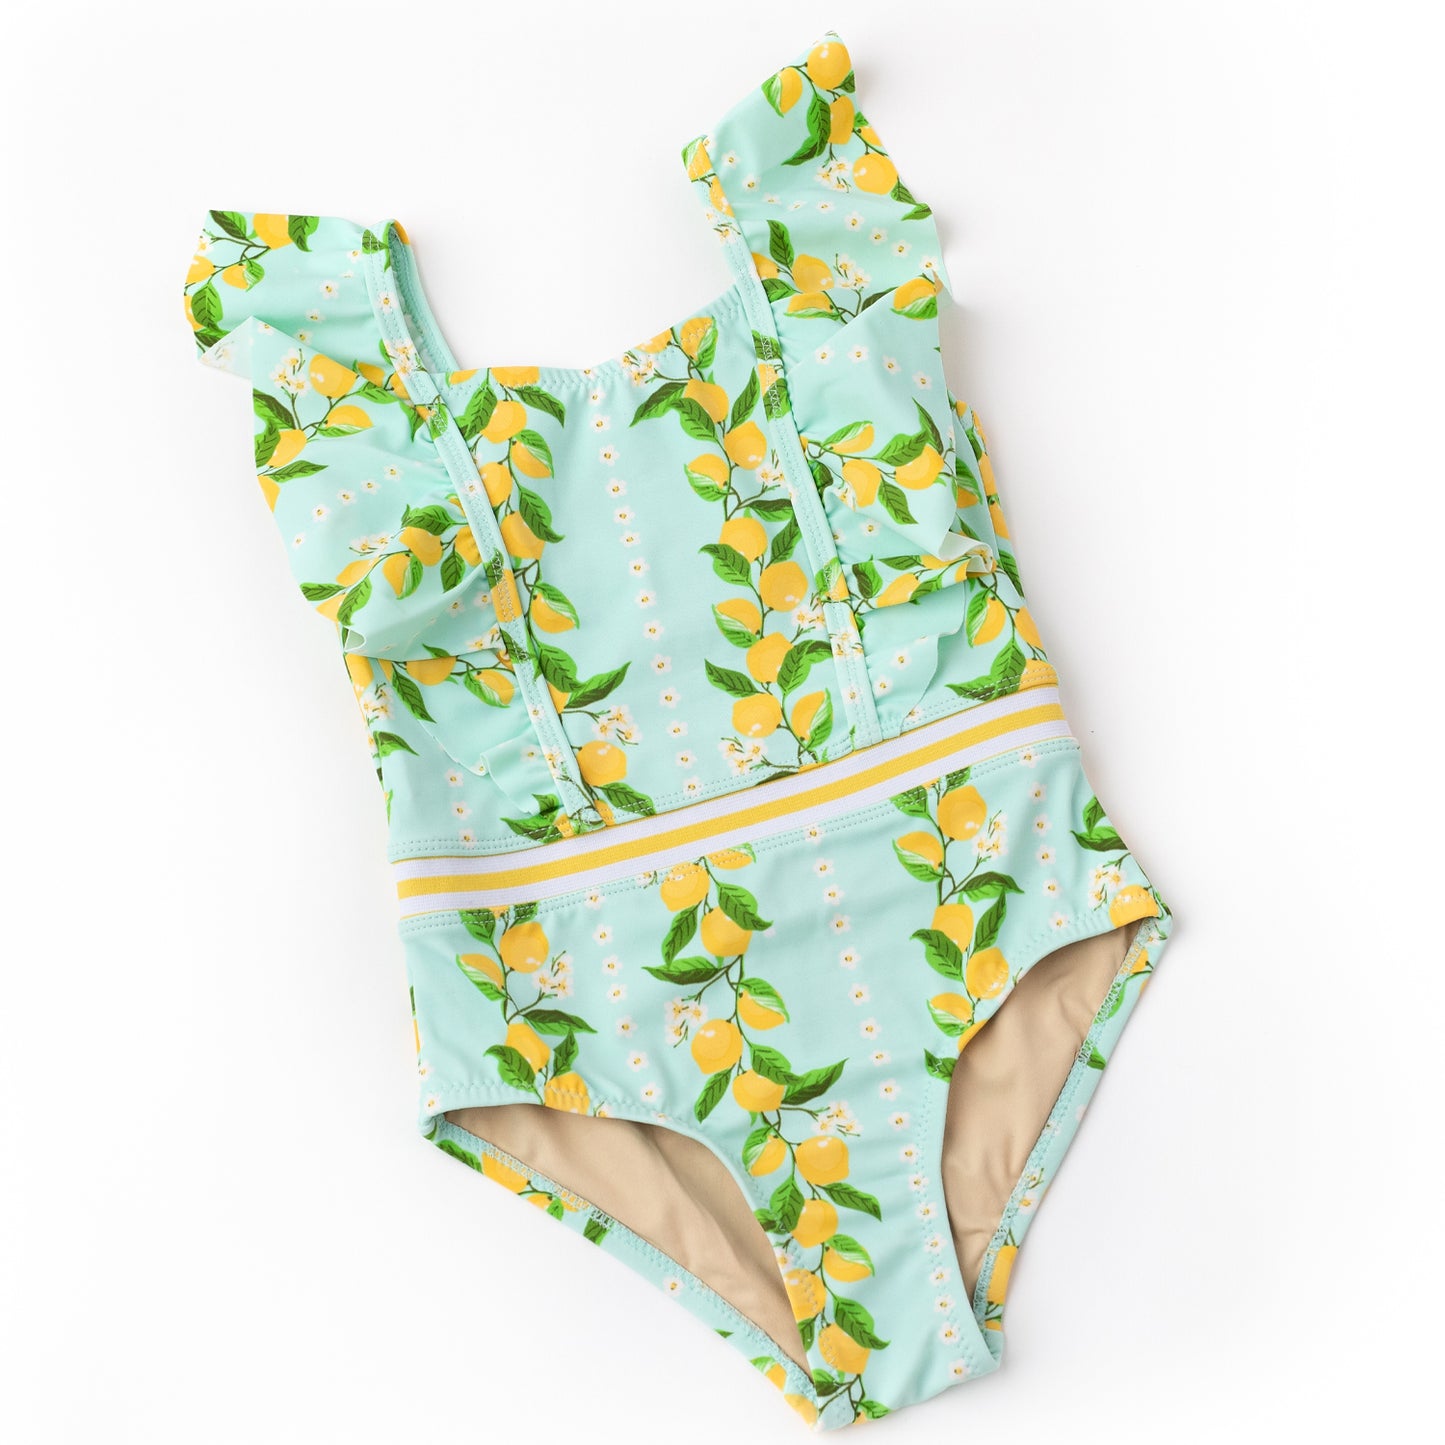 Shade Critters Citrus Grove Ruffle Shoulder Swimsuit